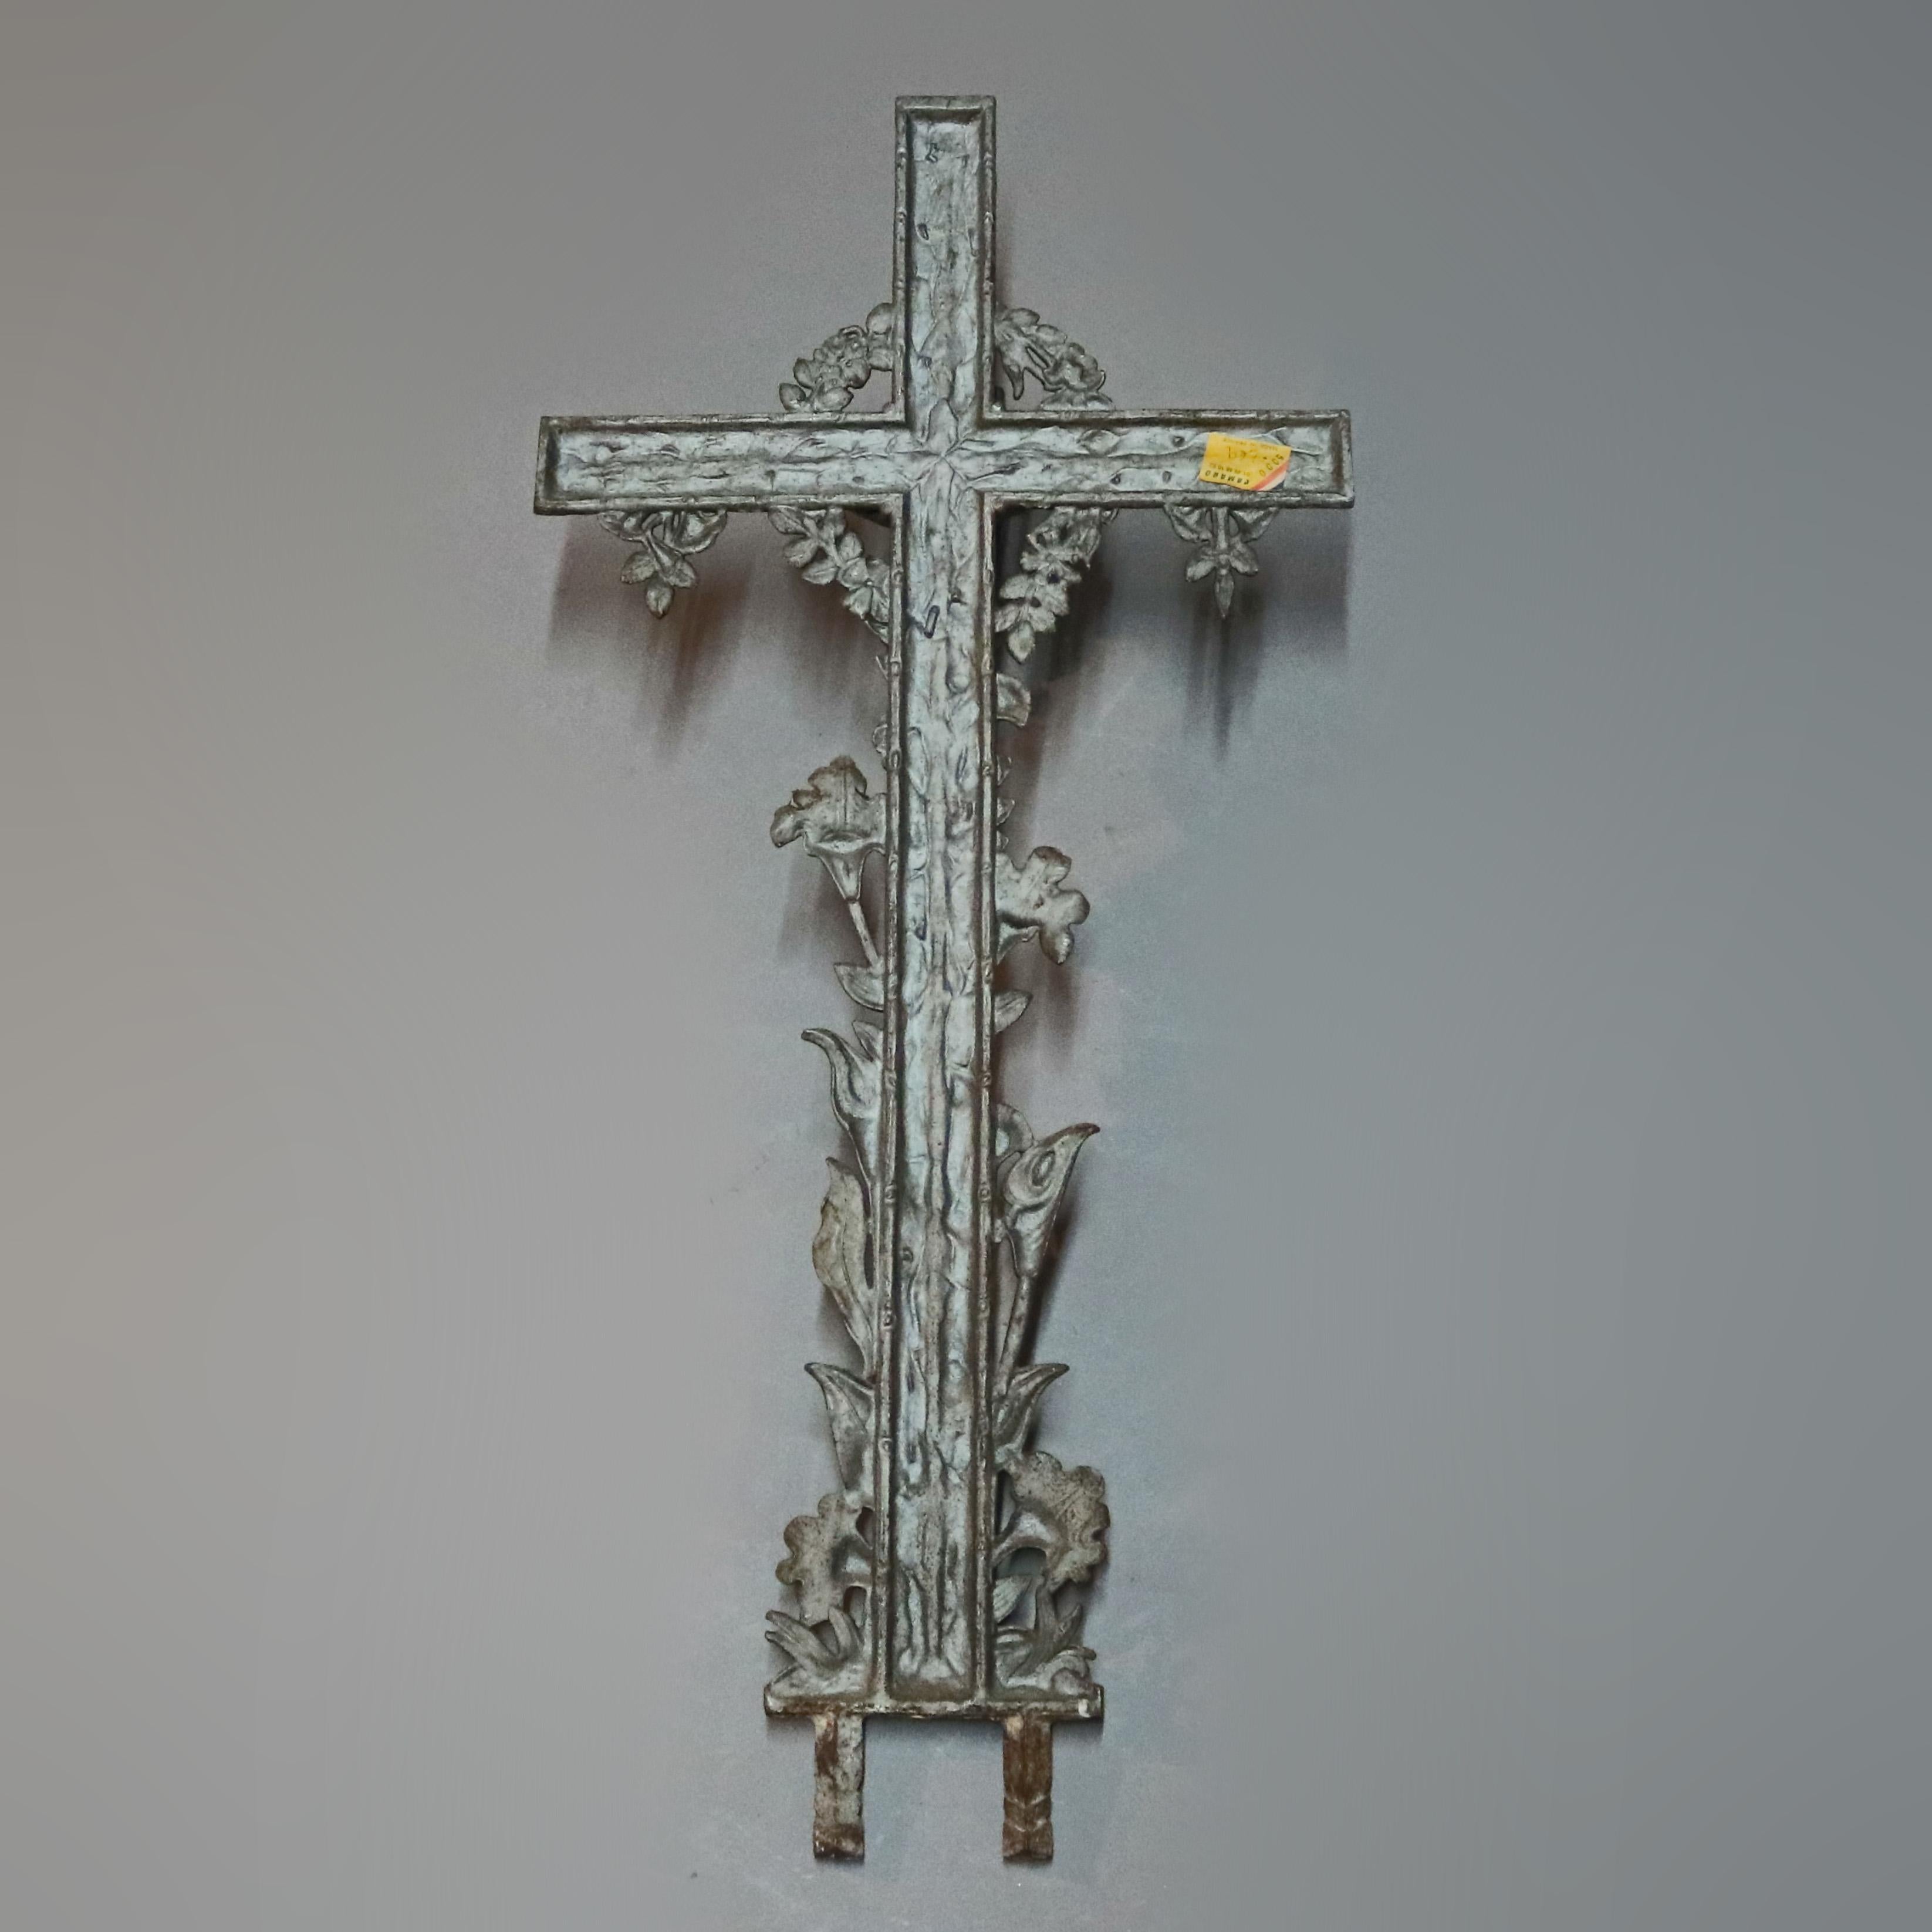 An antique and large cast iron crucifix offers cross with Jesus Christ with floral and foliate elements in high relief, base with double stakes, circa 1900

Measures: 42.25